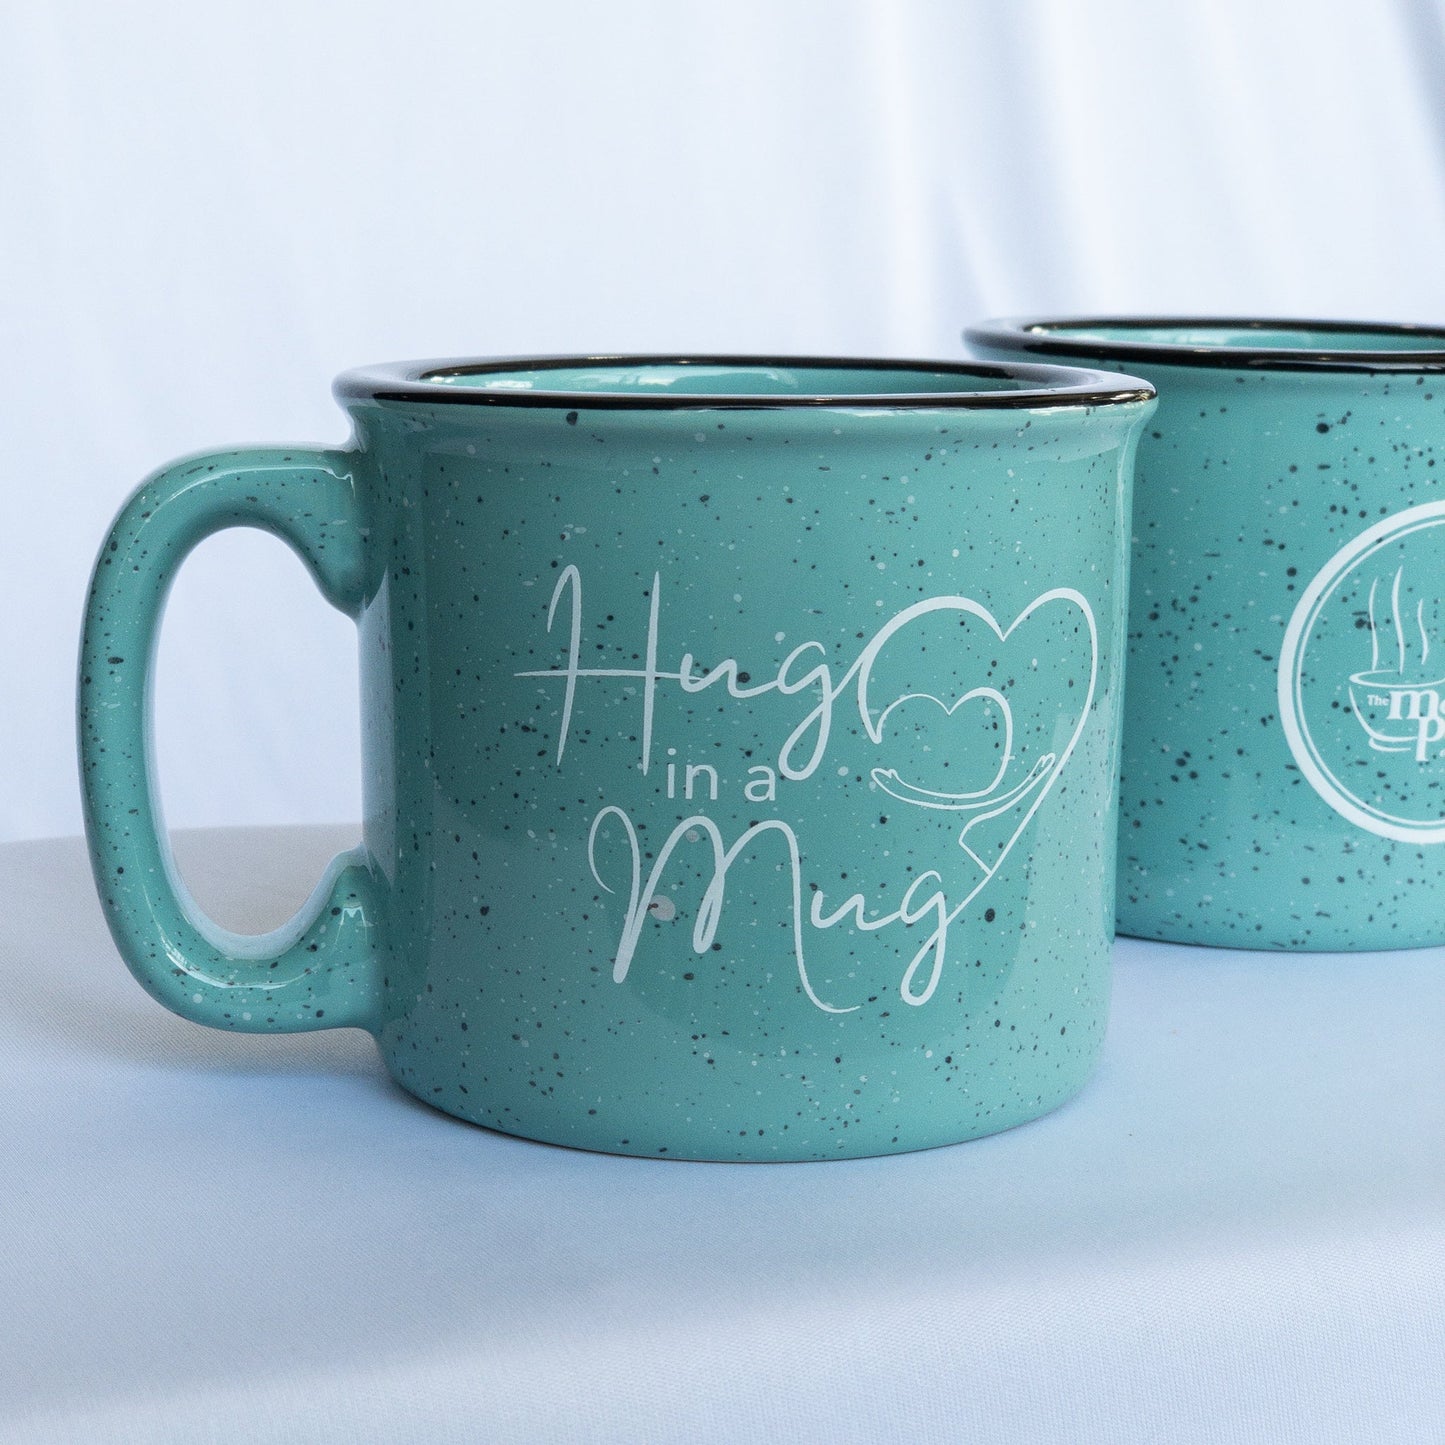 Hug in a Mug Tea Lover's Gift Box Valentine's Day Gift Basket - The Meeting Place on Market